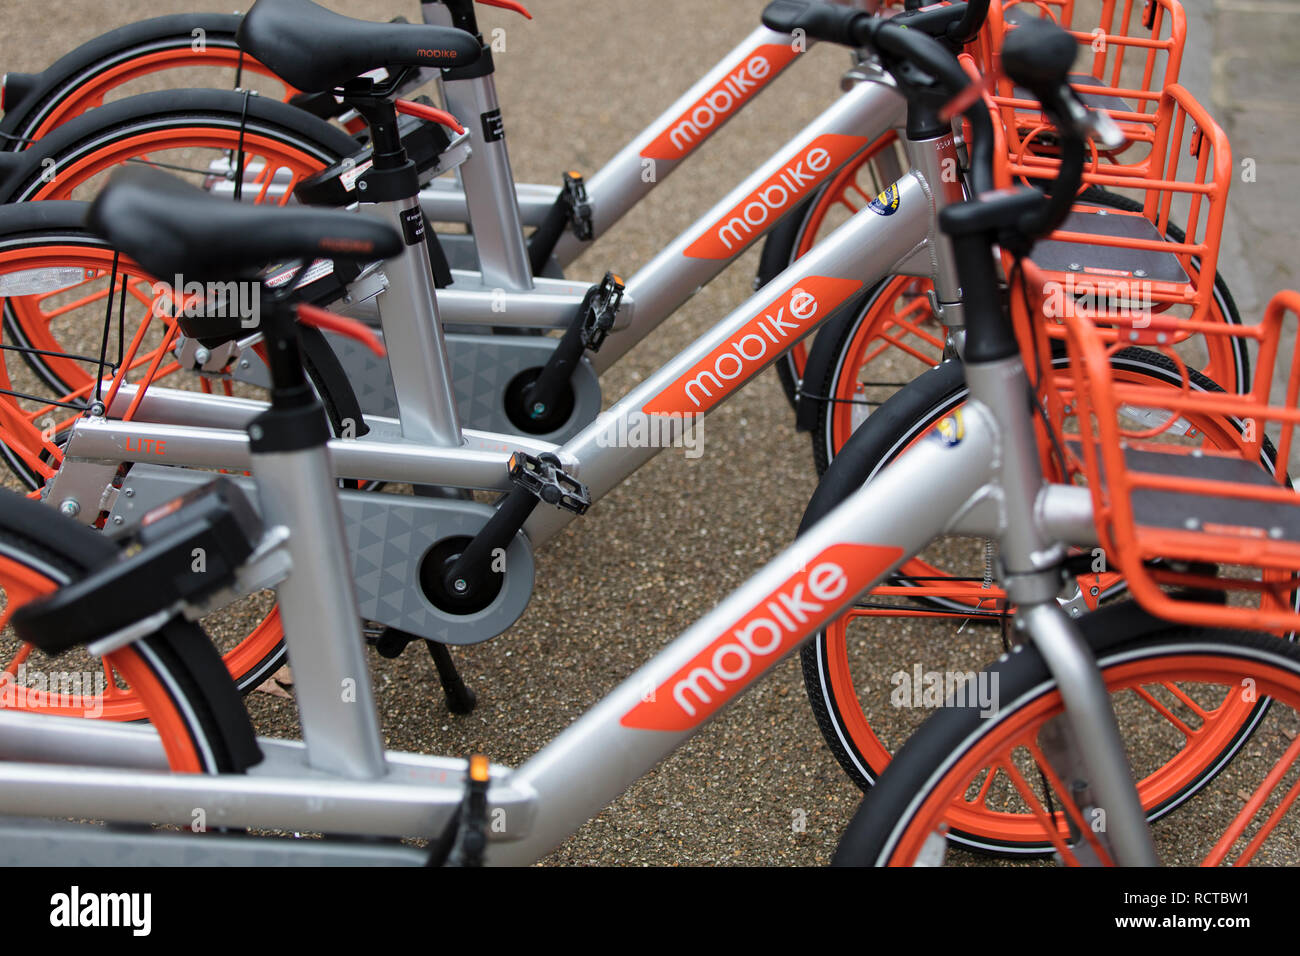 LONDON, ENGLAND - JANUARY 15, 2019: Mobike dockless bicycles parked in a street. Mobike is a bike sharing platform for short distance travel. Stock Photo